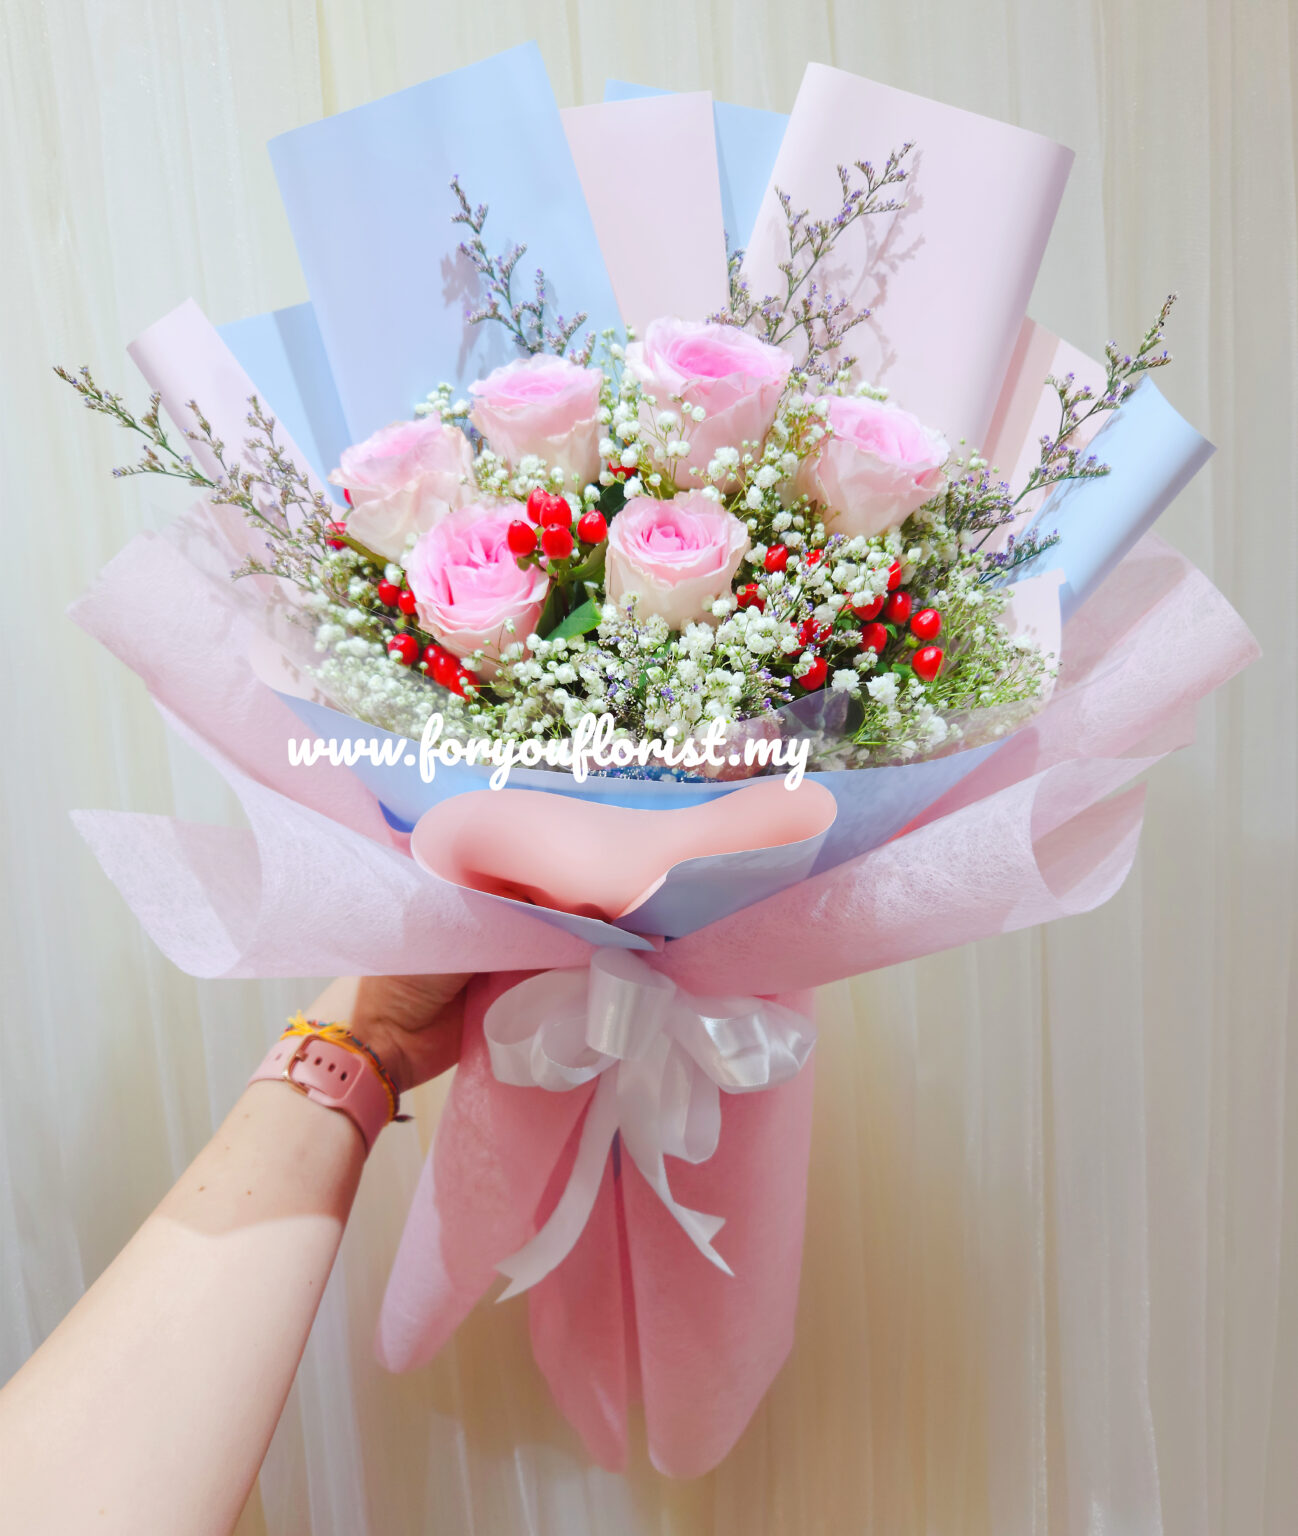 Top Penang Florists | Easy Online Ordering | For Your Flowers & Gifts